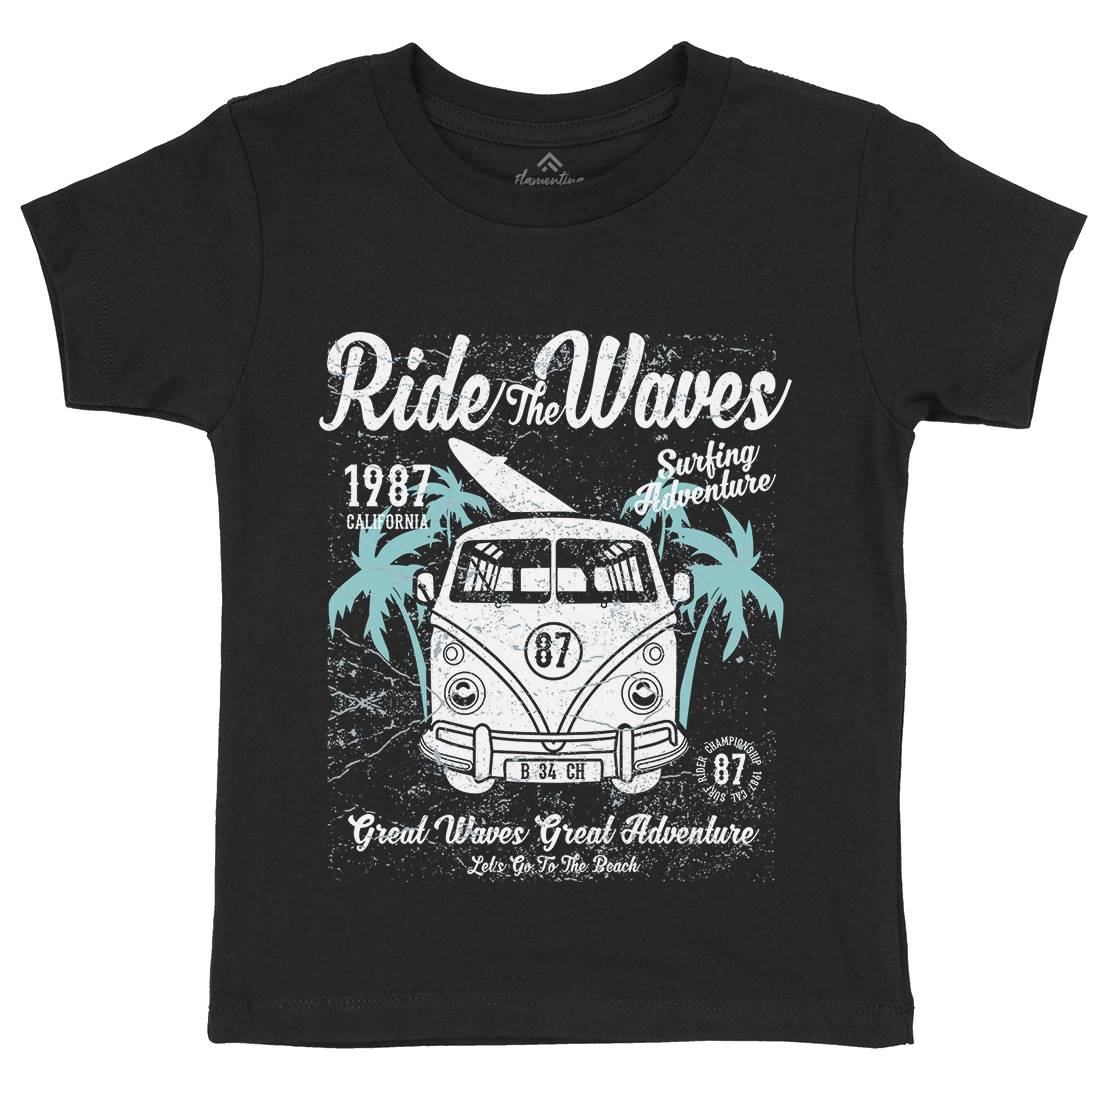 Ride The Waves Kids Crew Neck T-Shirt Surf A119